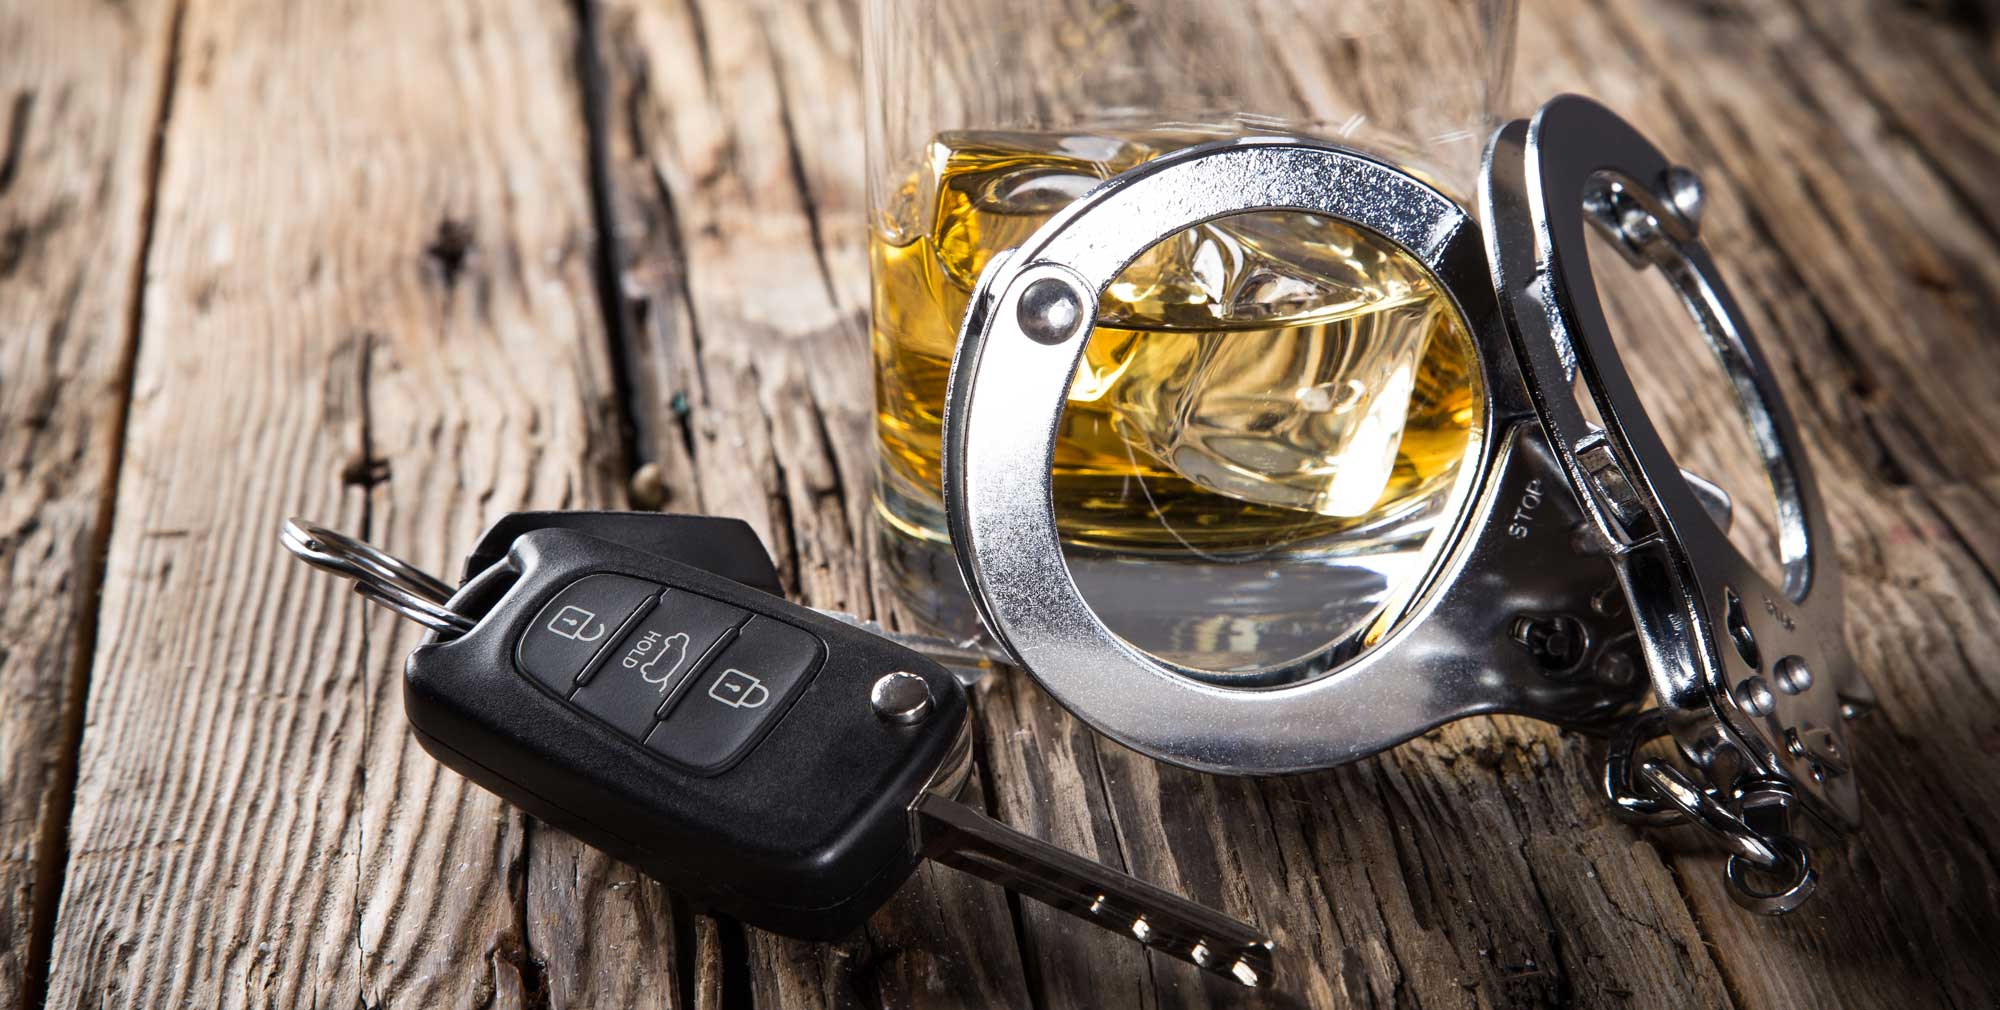 Glass of whiskey, car keys, and handcuffs on a wooden table